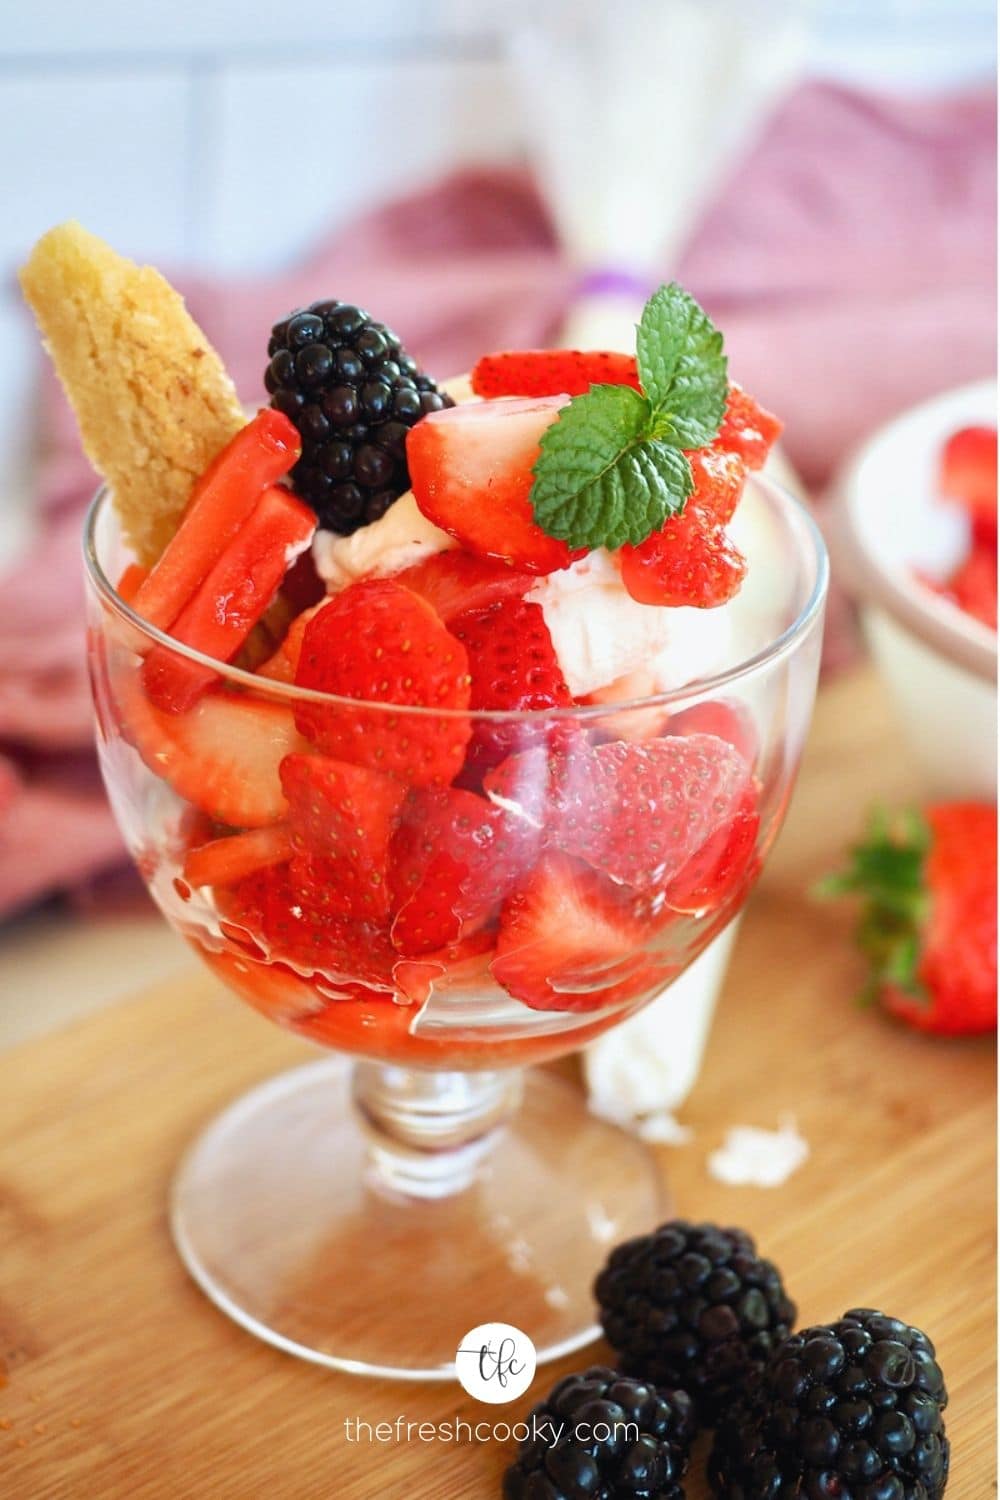 Old Fashioned Strawberry Shortcake in glass footed dish with strawberries and whipped cream, topped with mint.